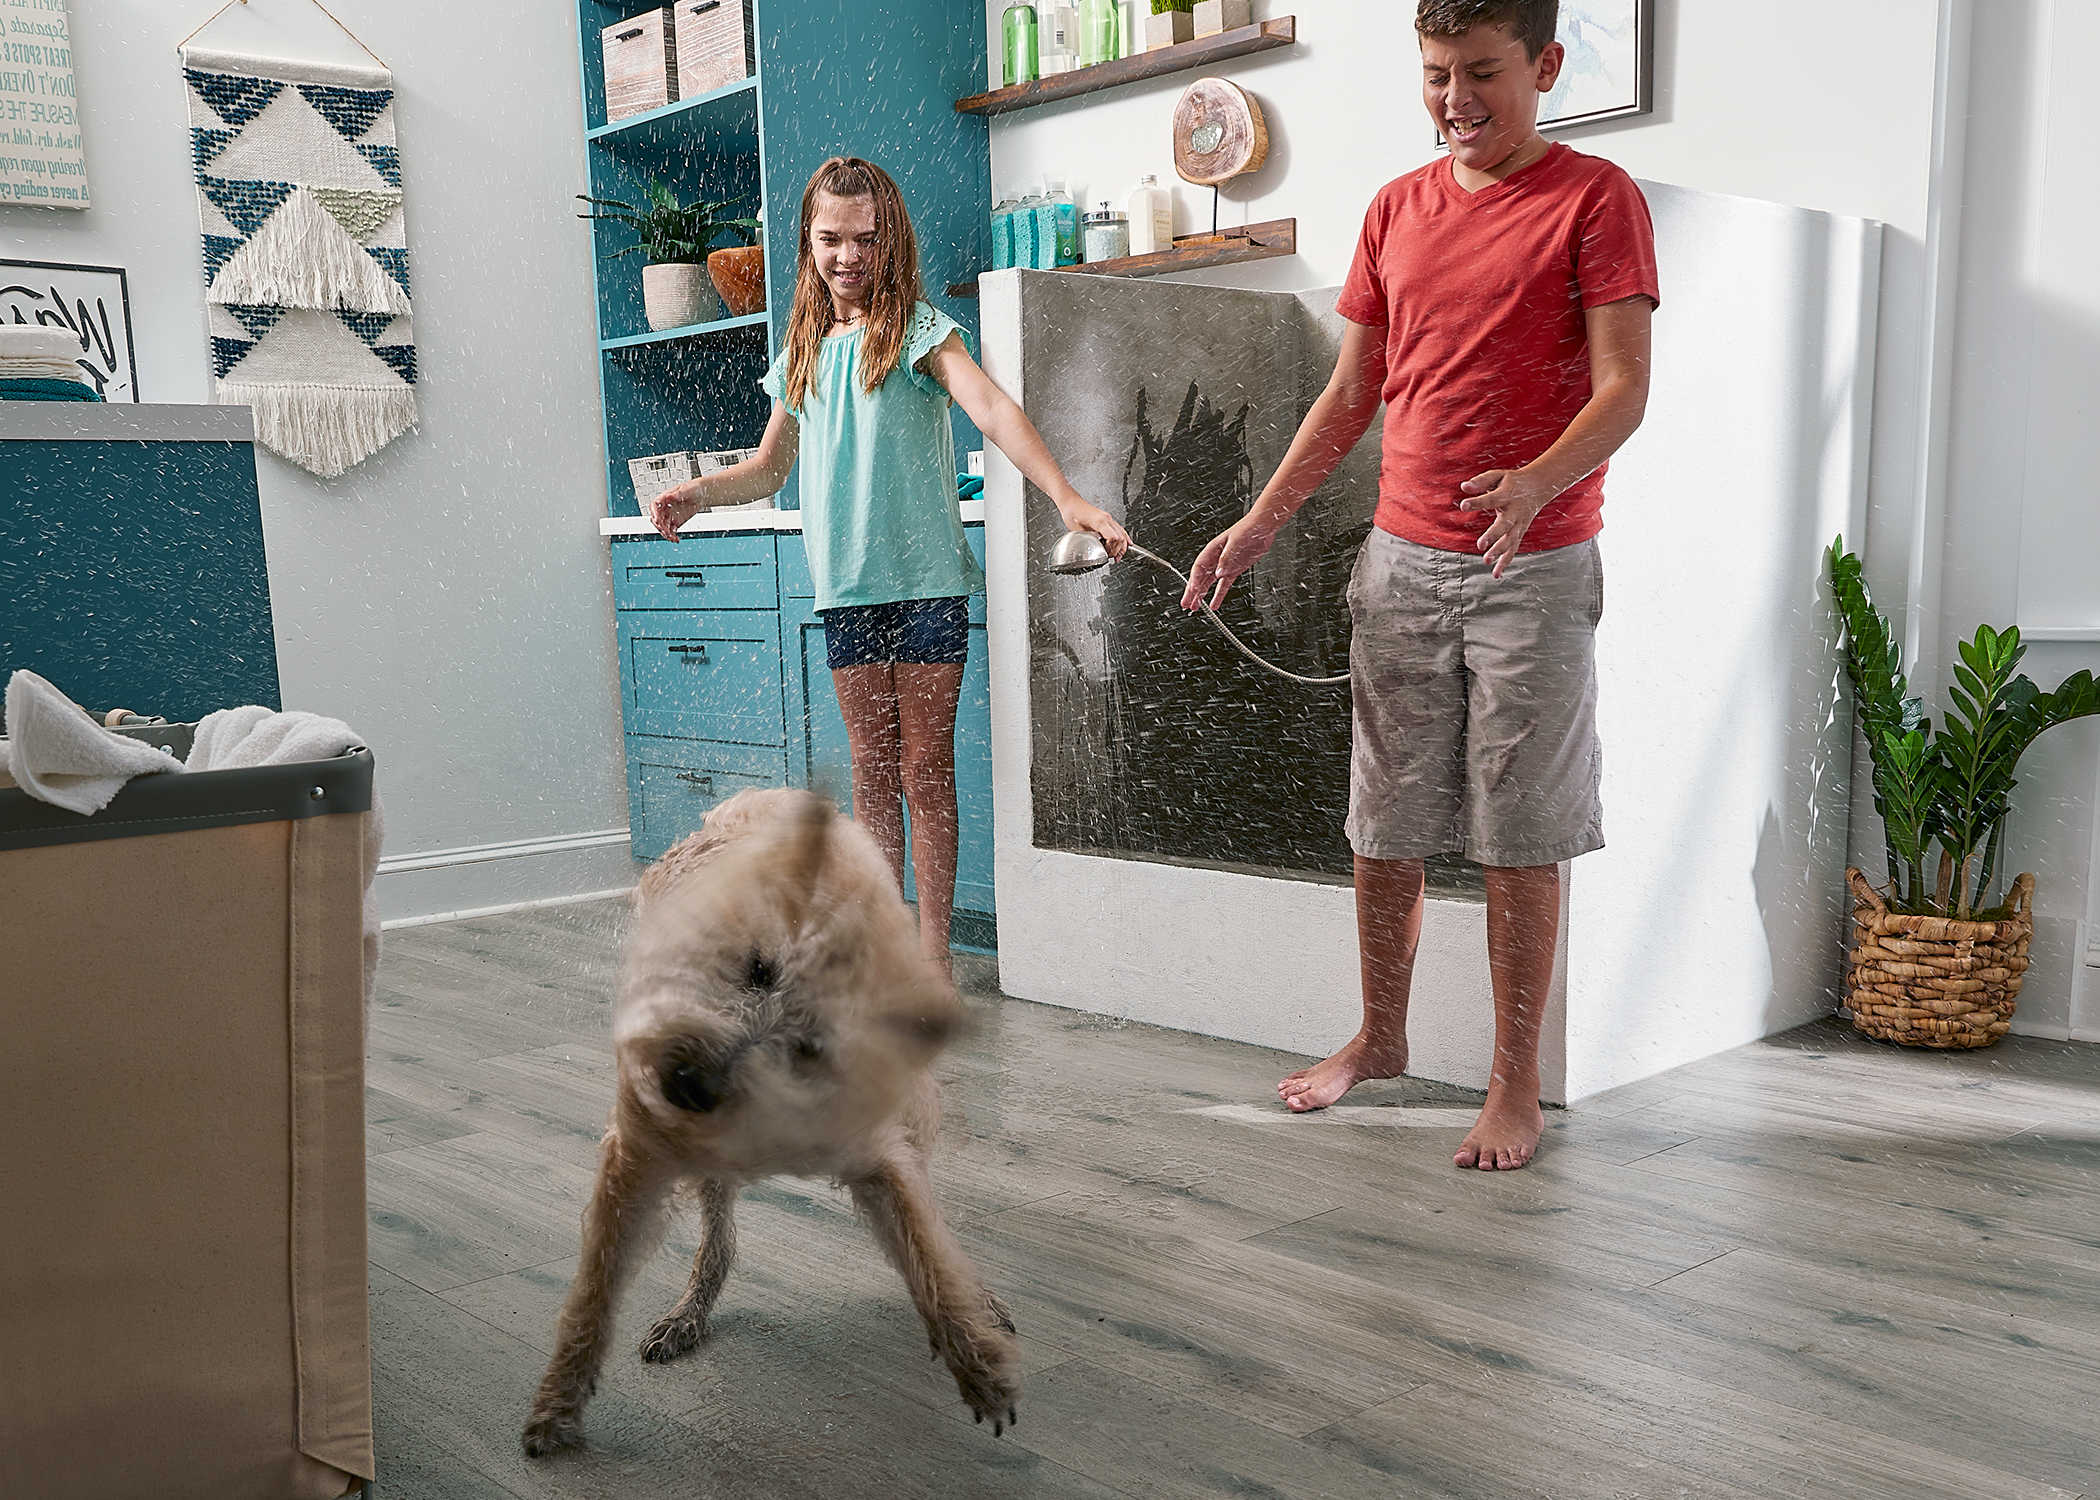 greige waterproof hybrid resilient floor in laundry room and dog washing station with pre teens in red shirt and blue shirt washing tan and white dog while dog shakes water all over floor